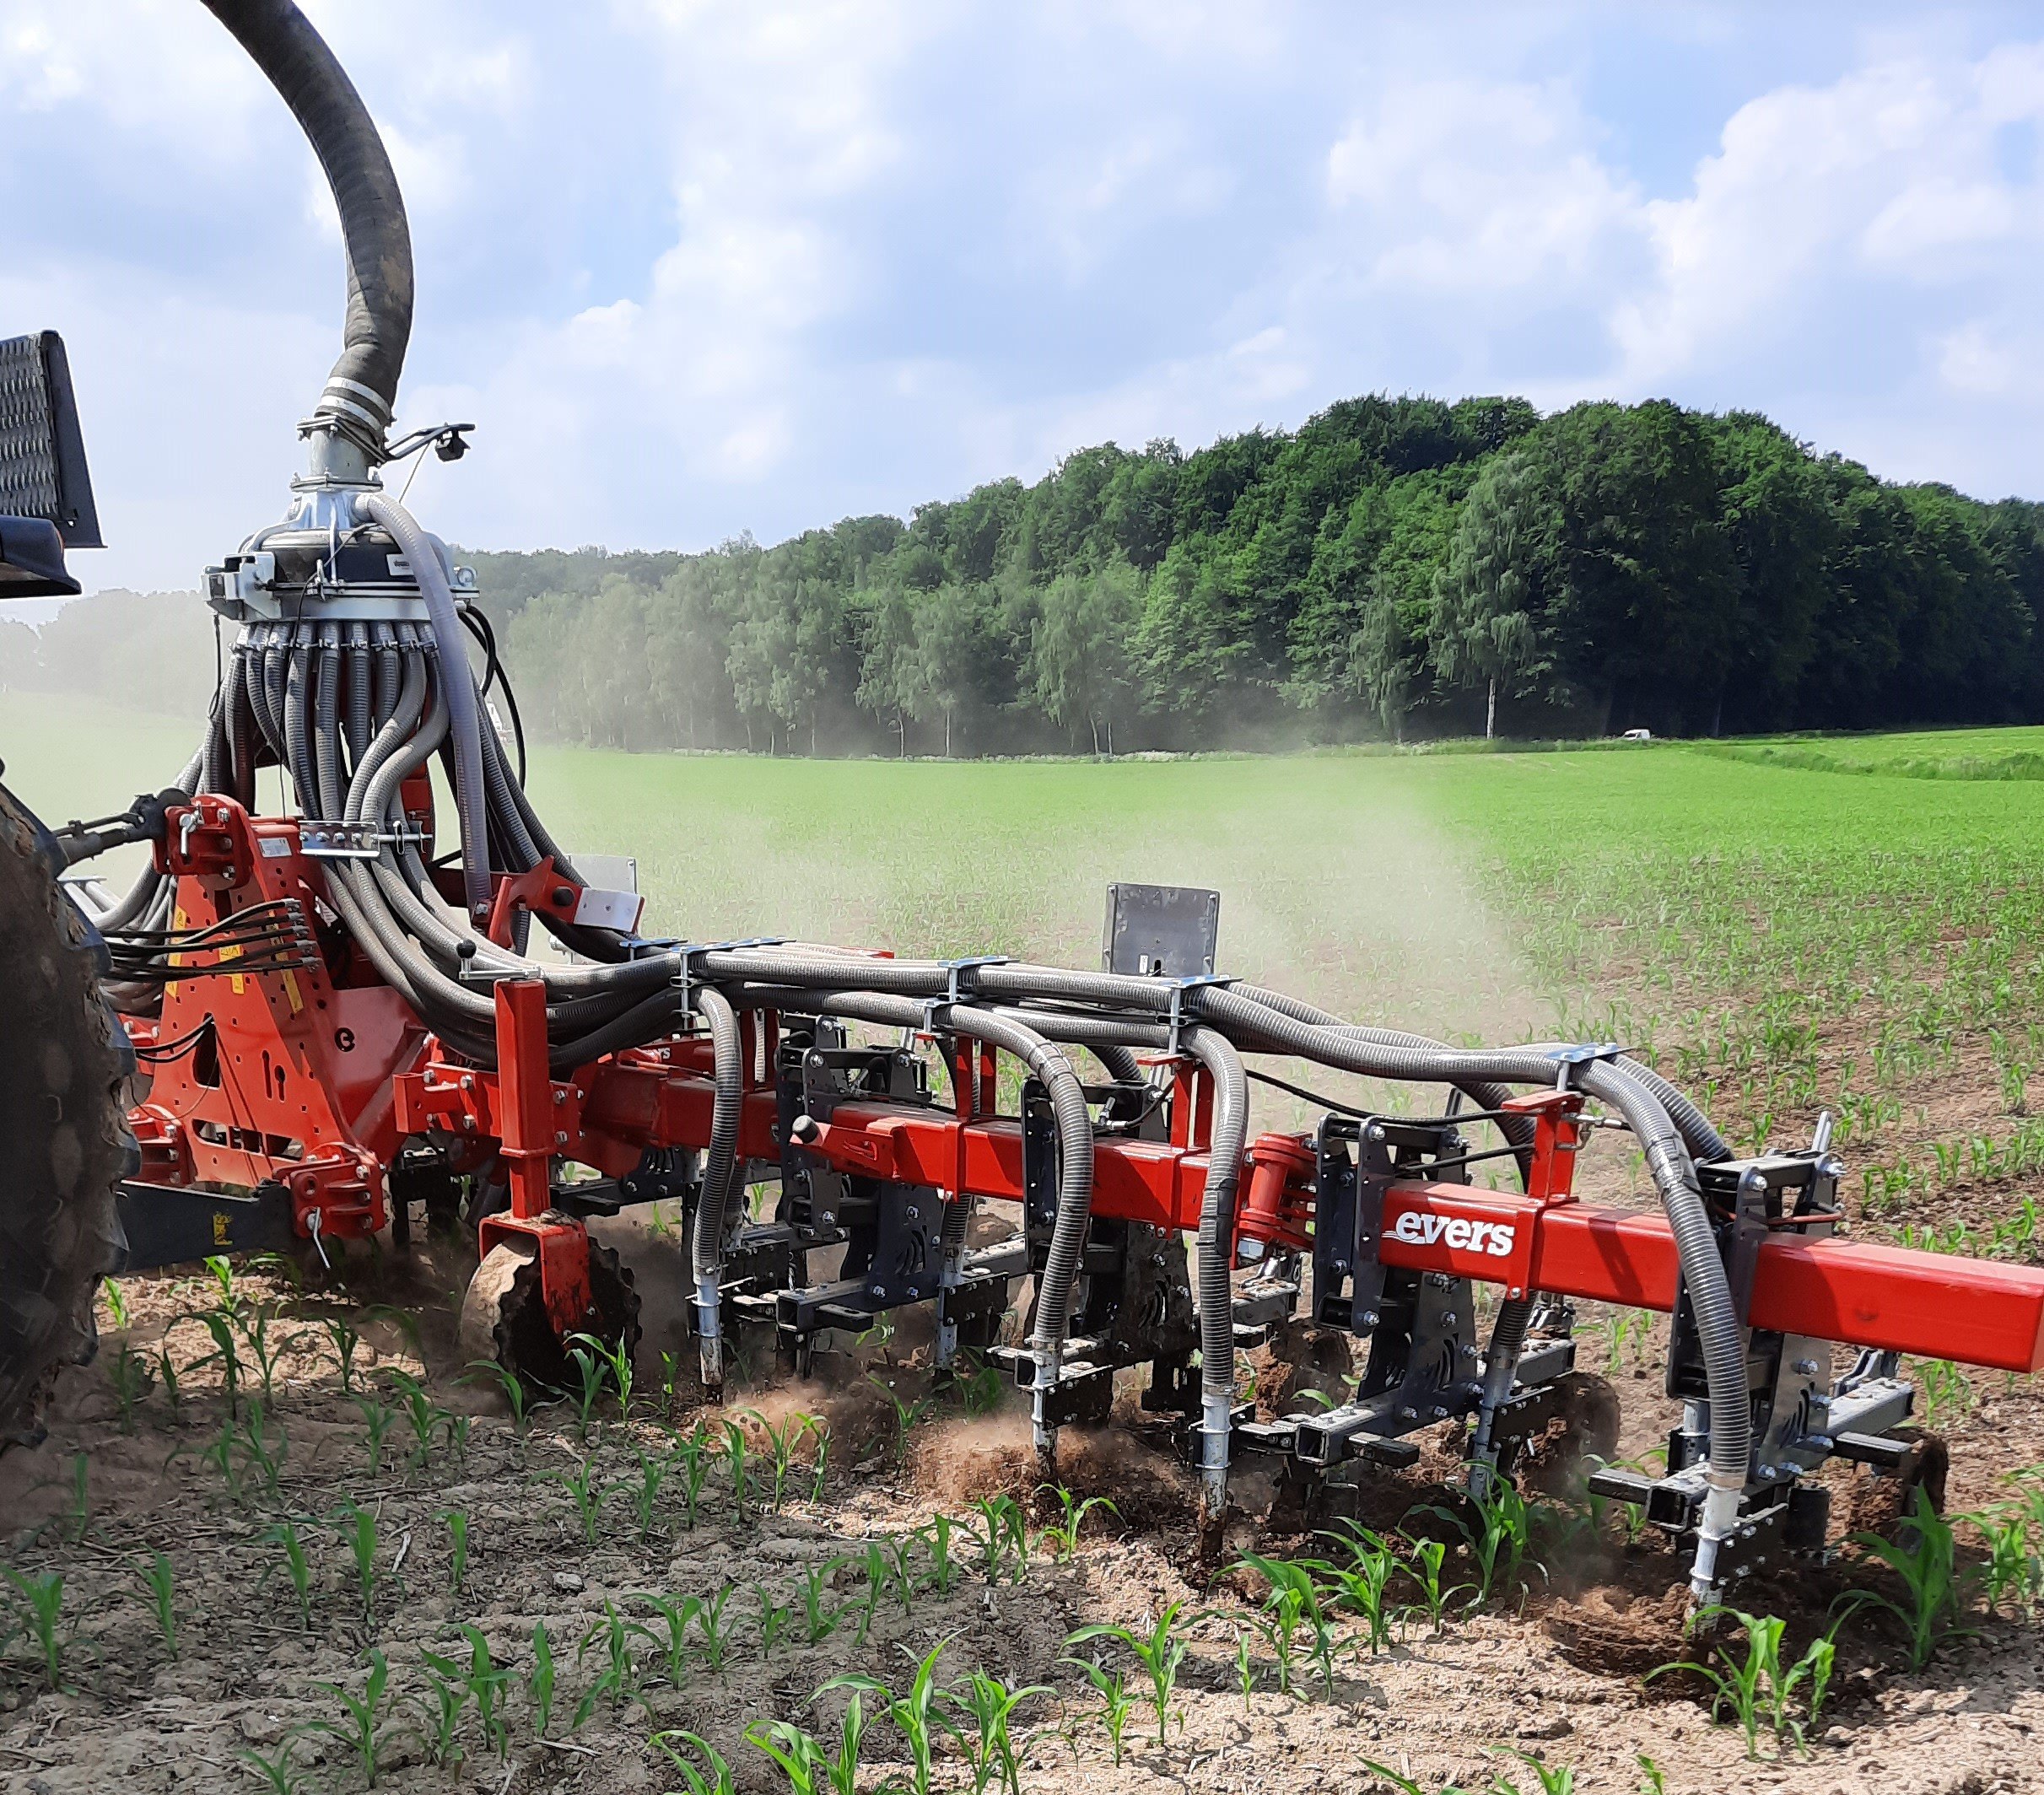 Evers Combi row-crop injector: slurry injection and hoeing of maize land in one pass